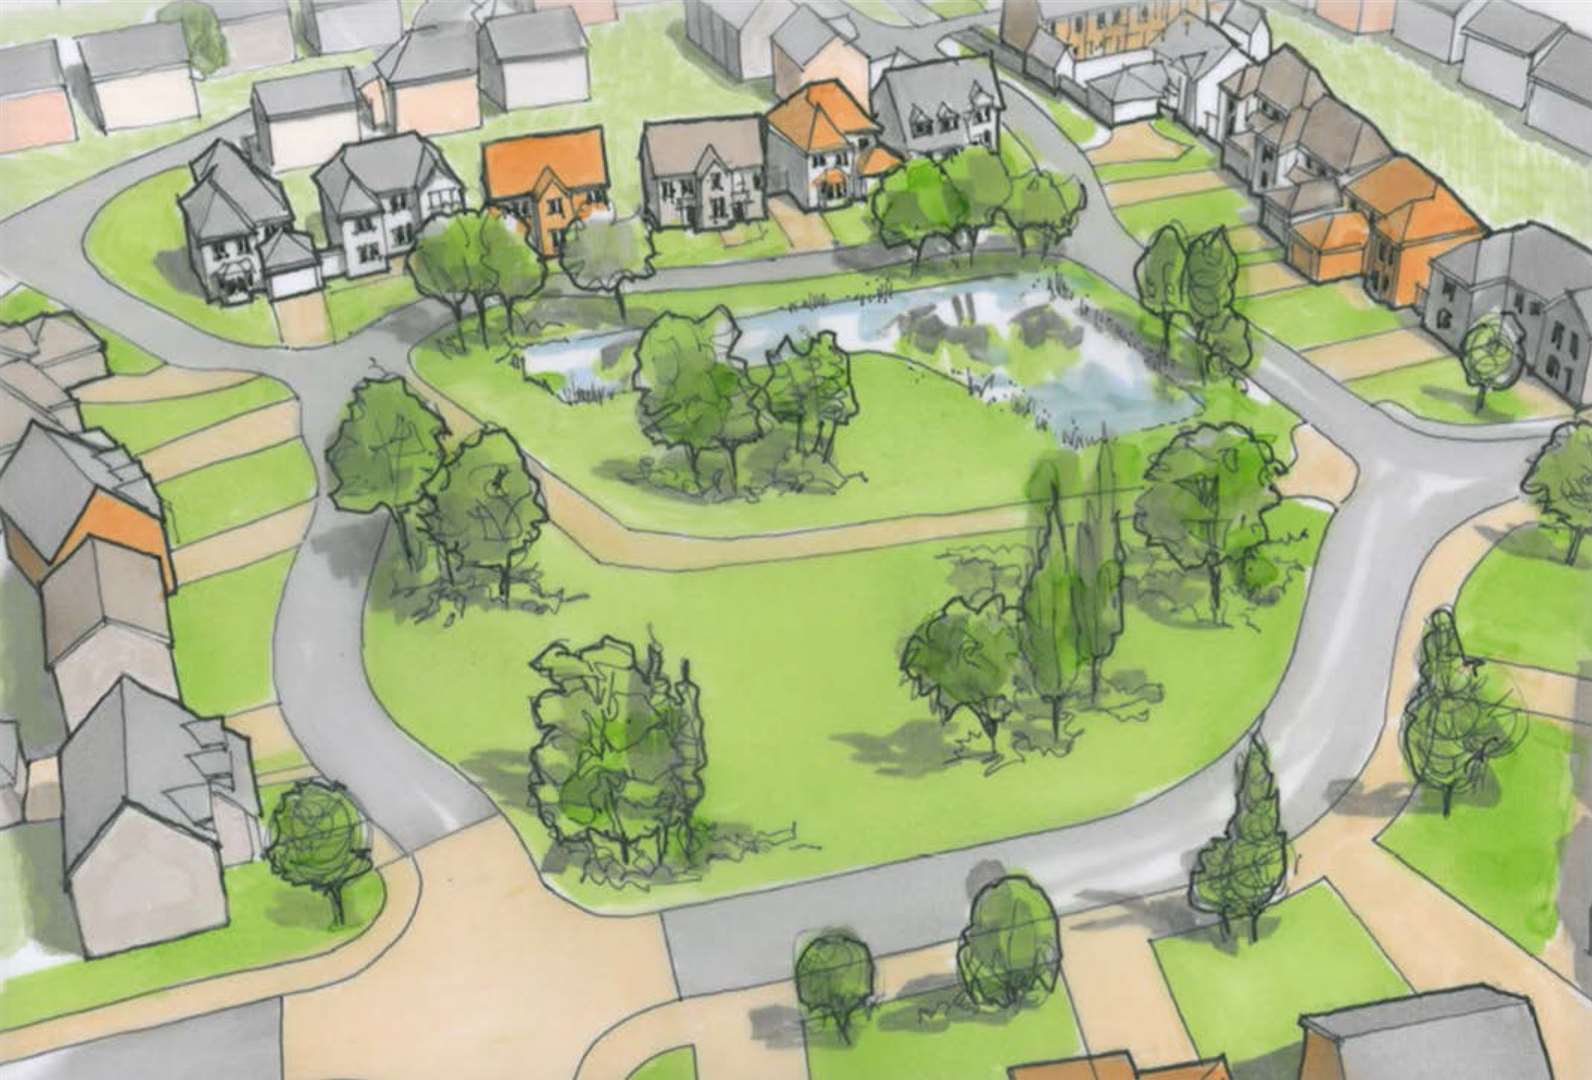 An artist's impression of how the scheme was set to look